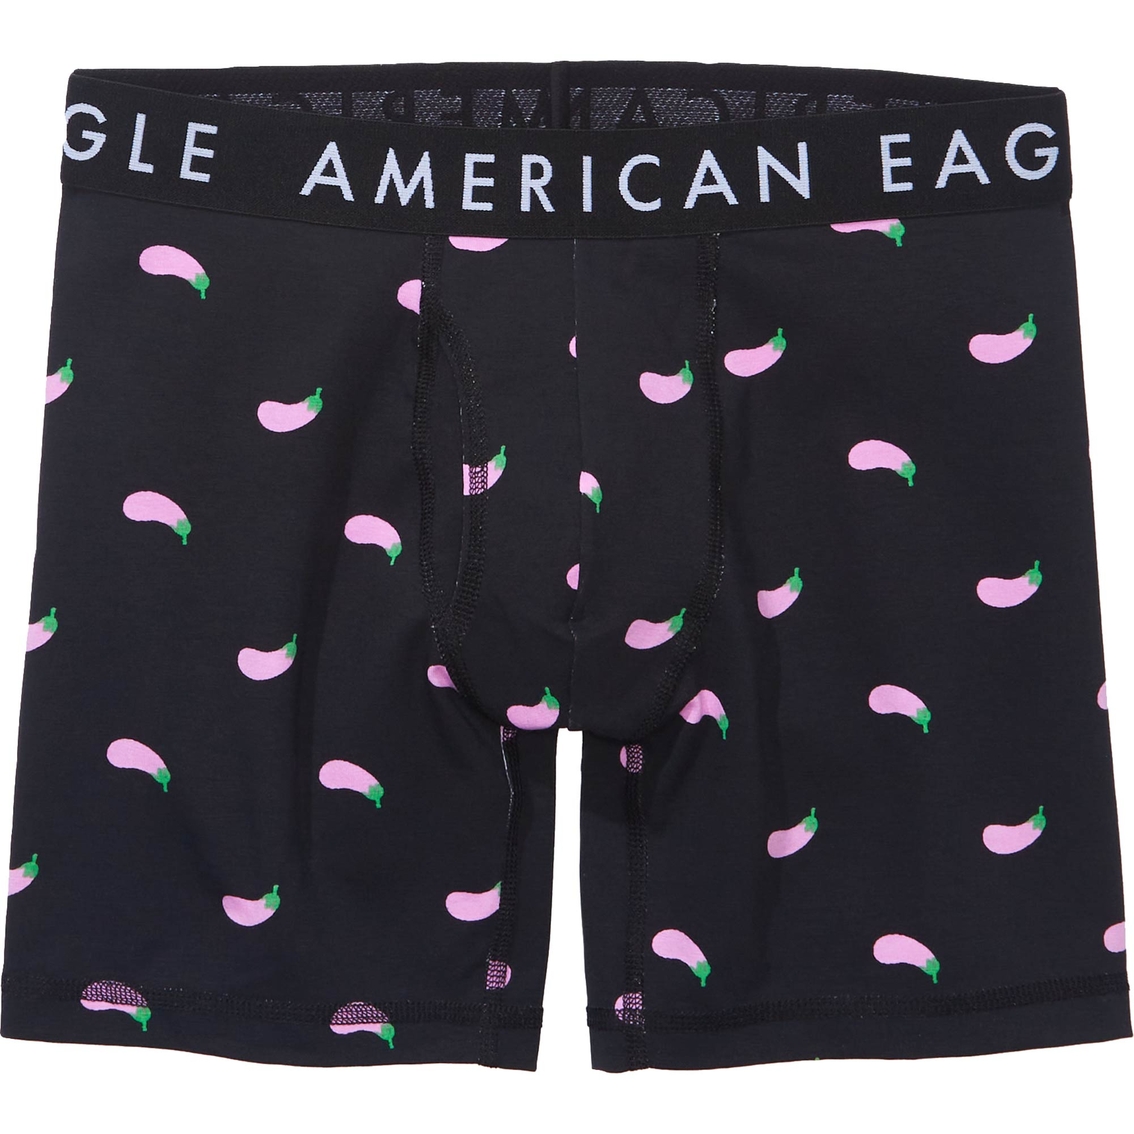 American Eagle AEO Eggplants 6 in. Classic Boxer Briefs - Image 3 of 5